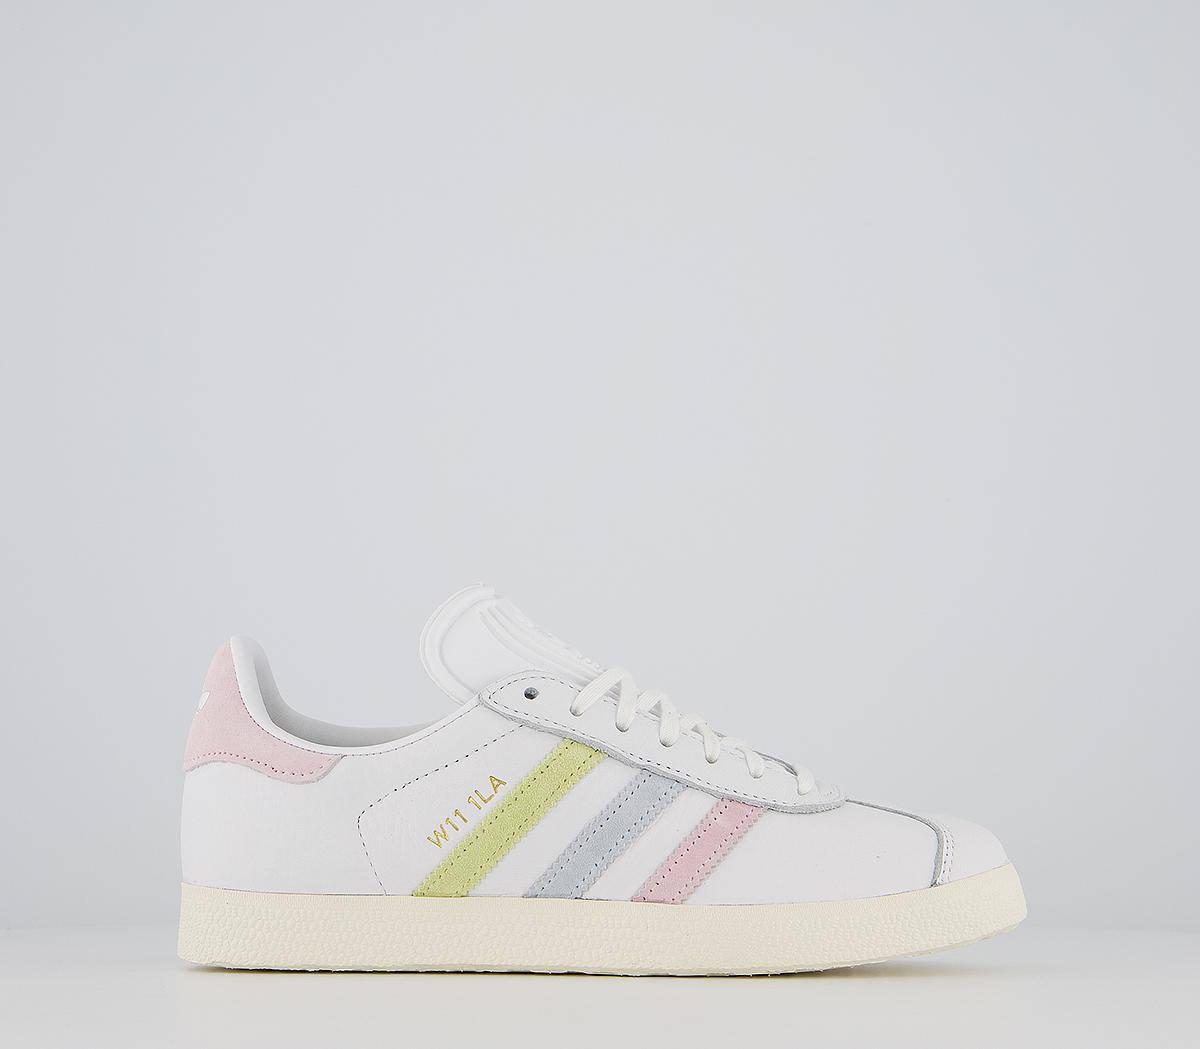 adidasGazelle TrainersWhite Clear Pink Tint W11 1la Exclusive